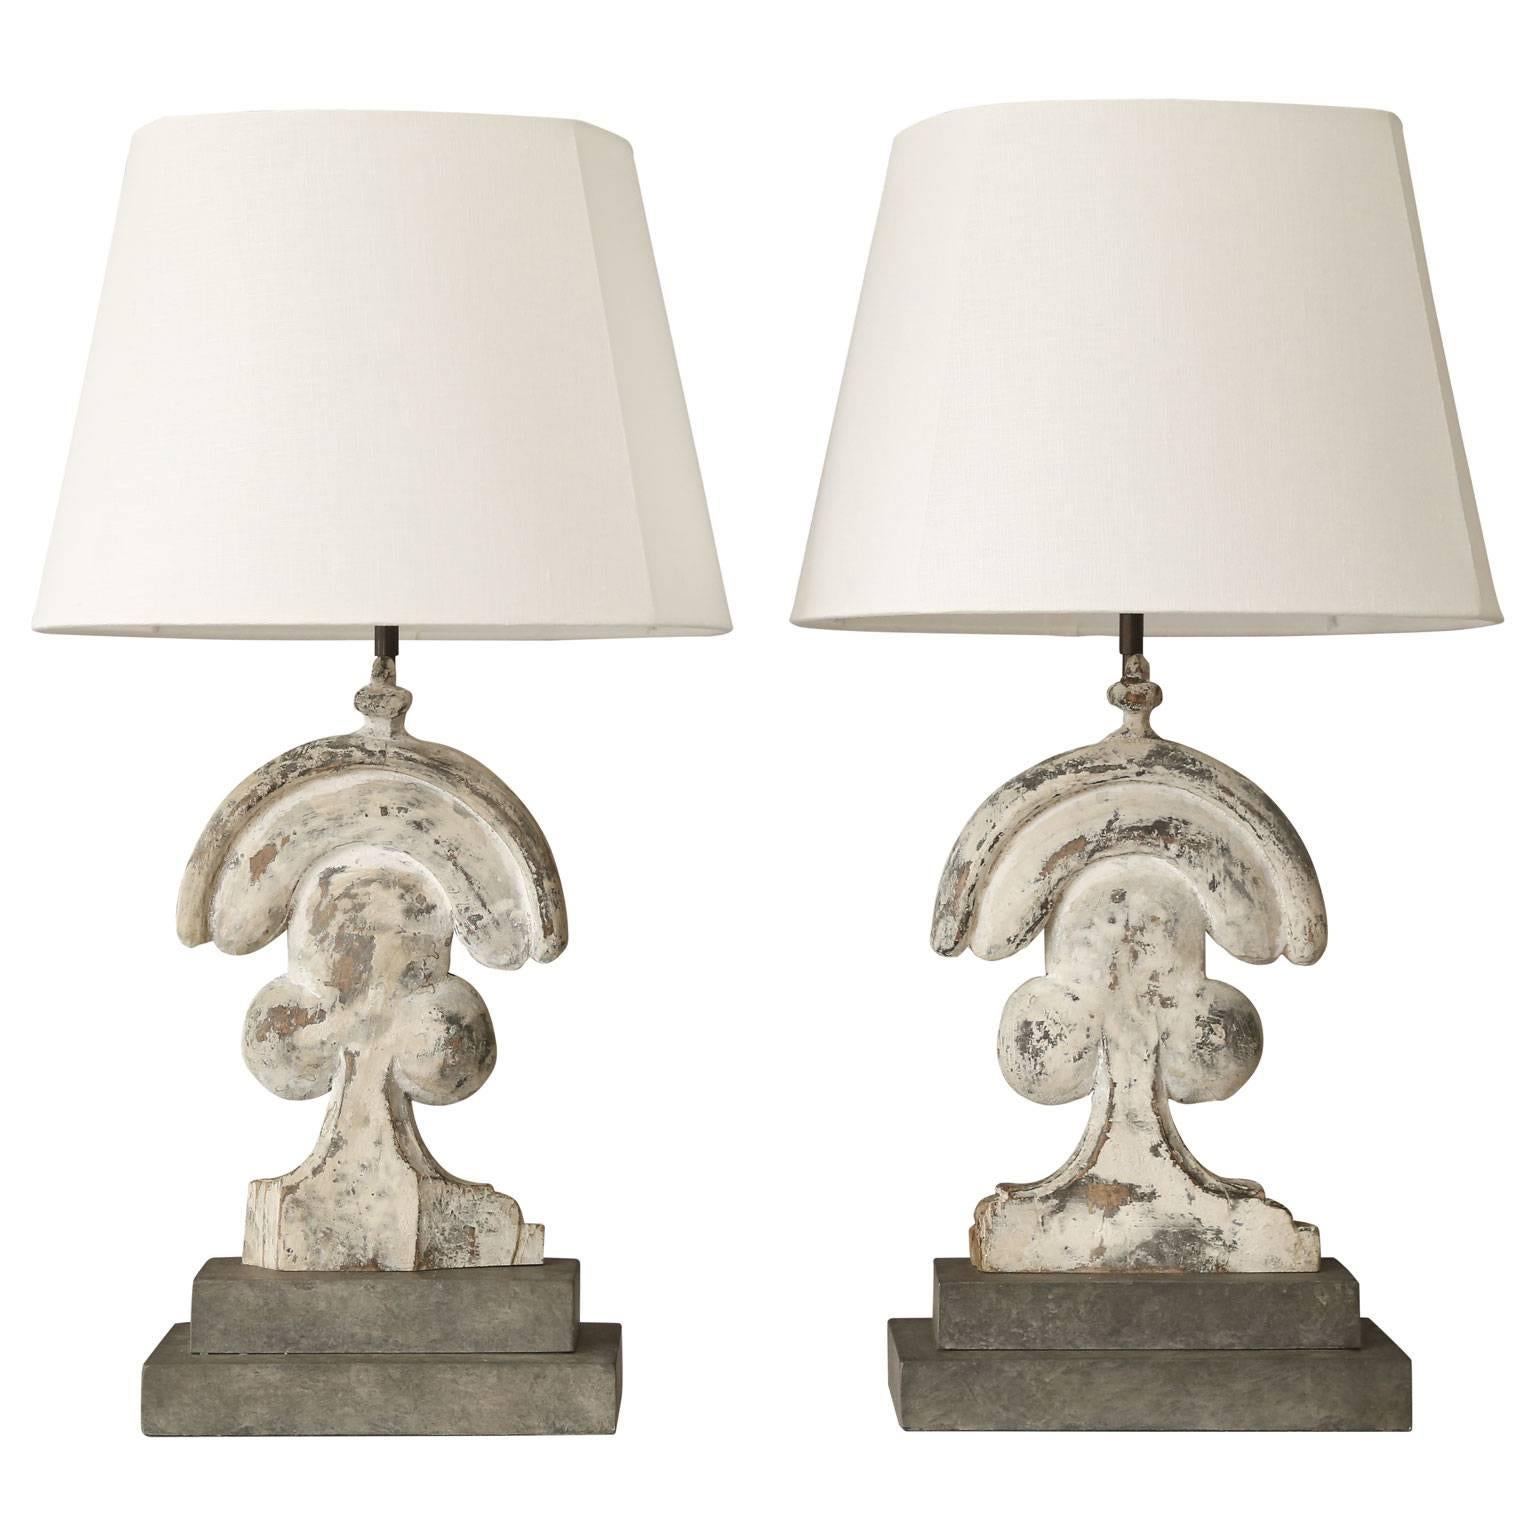 Pair of Custom Table Lamps from 19th Century Fragments